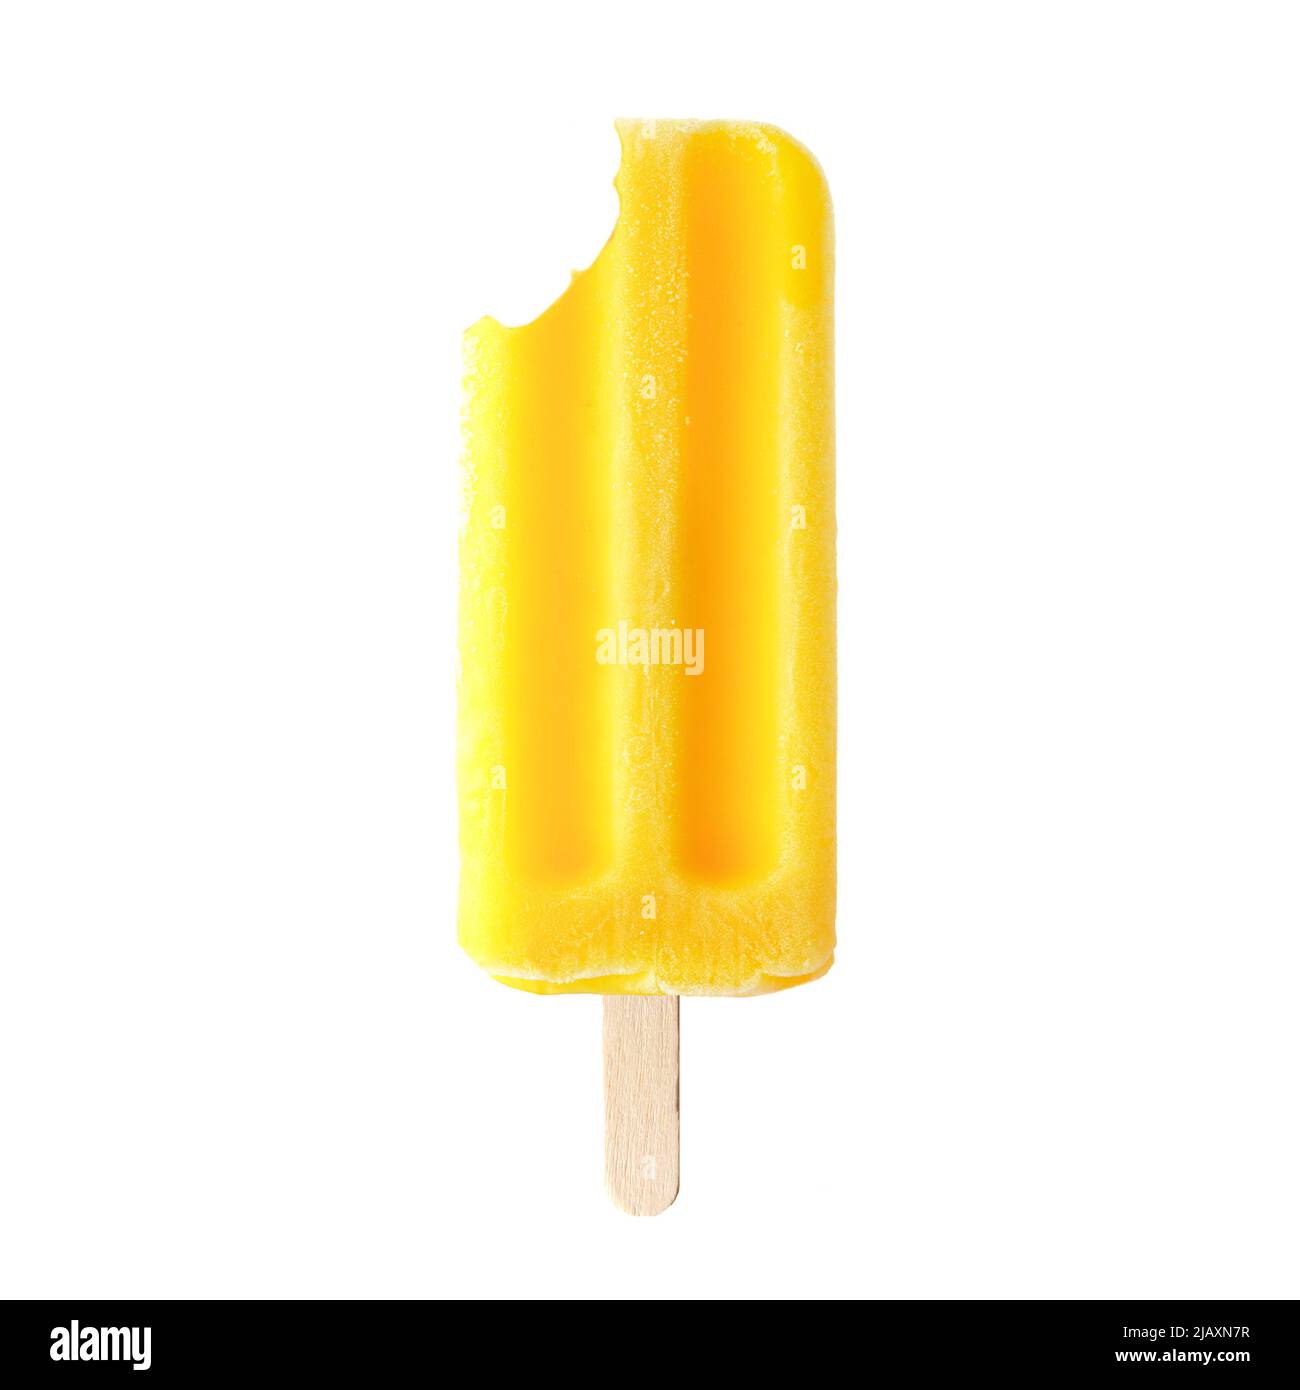 Single yellow summer popsicle with bite removed, isolated on a white background Stock Photo